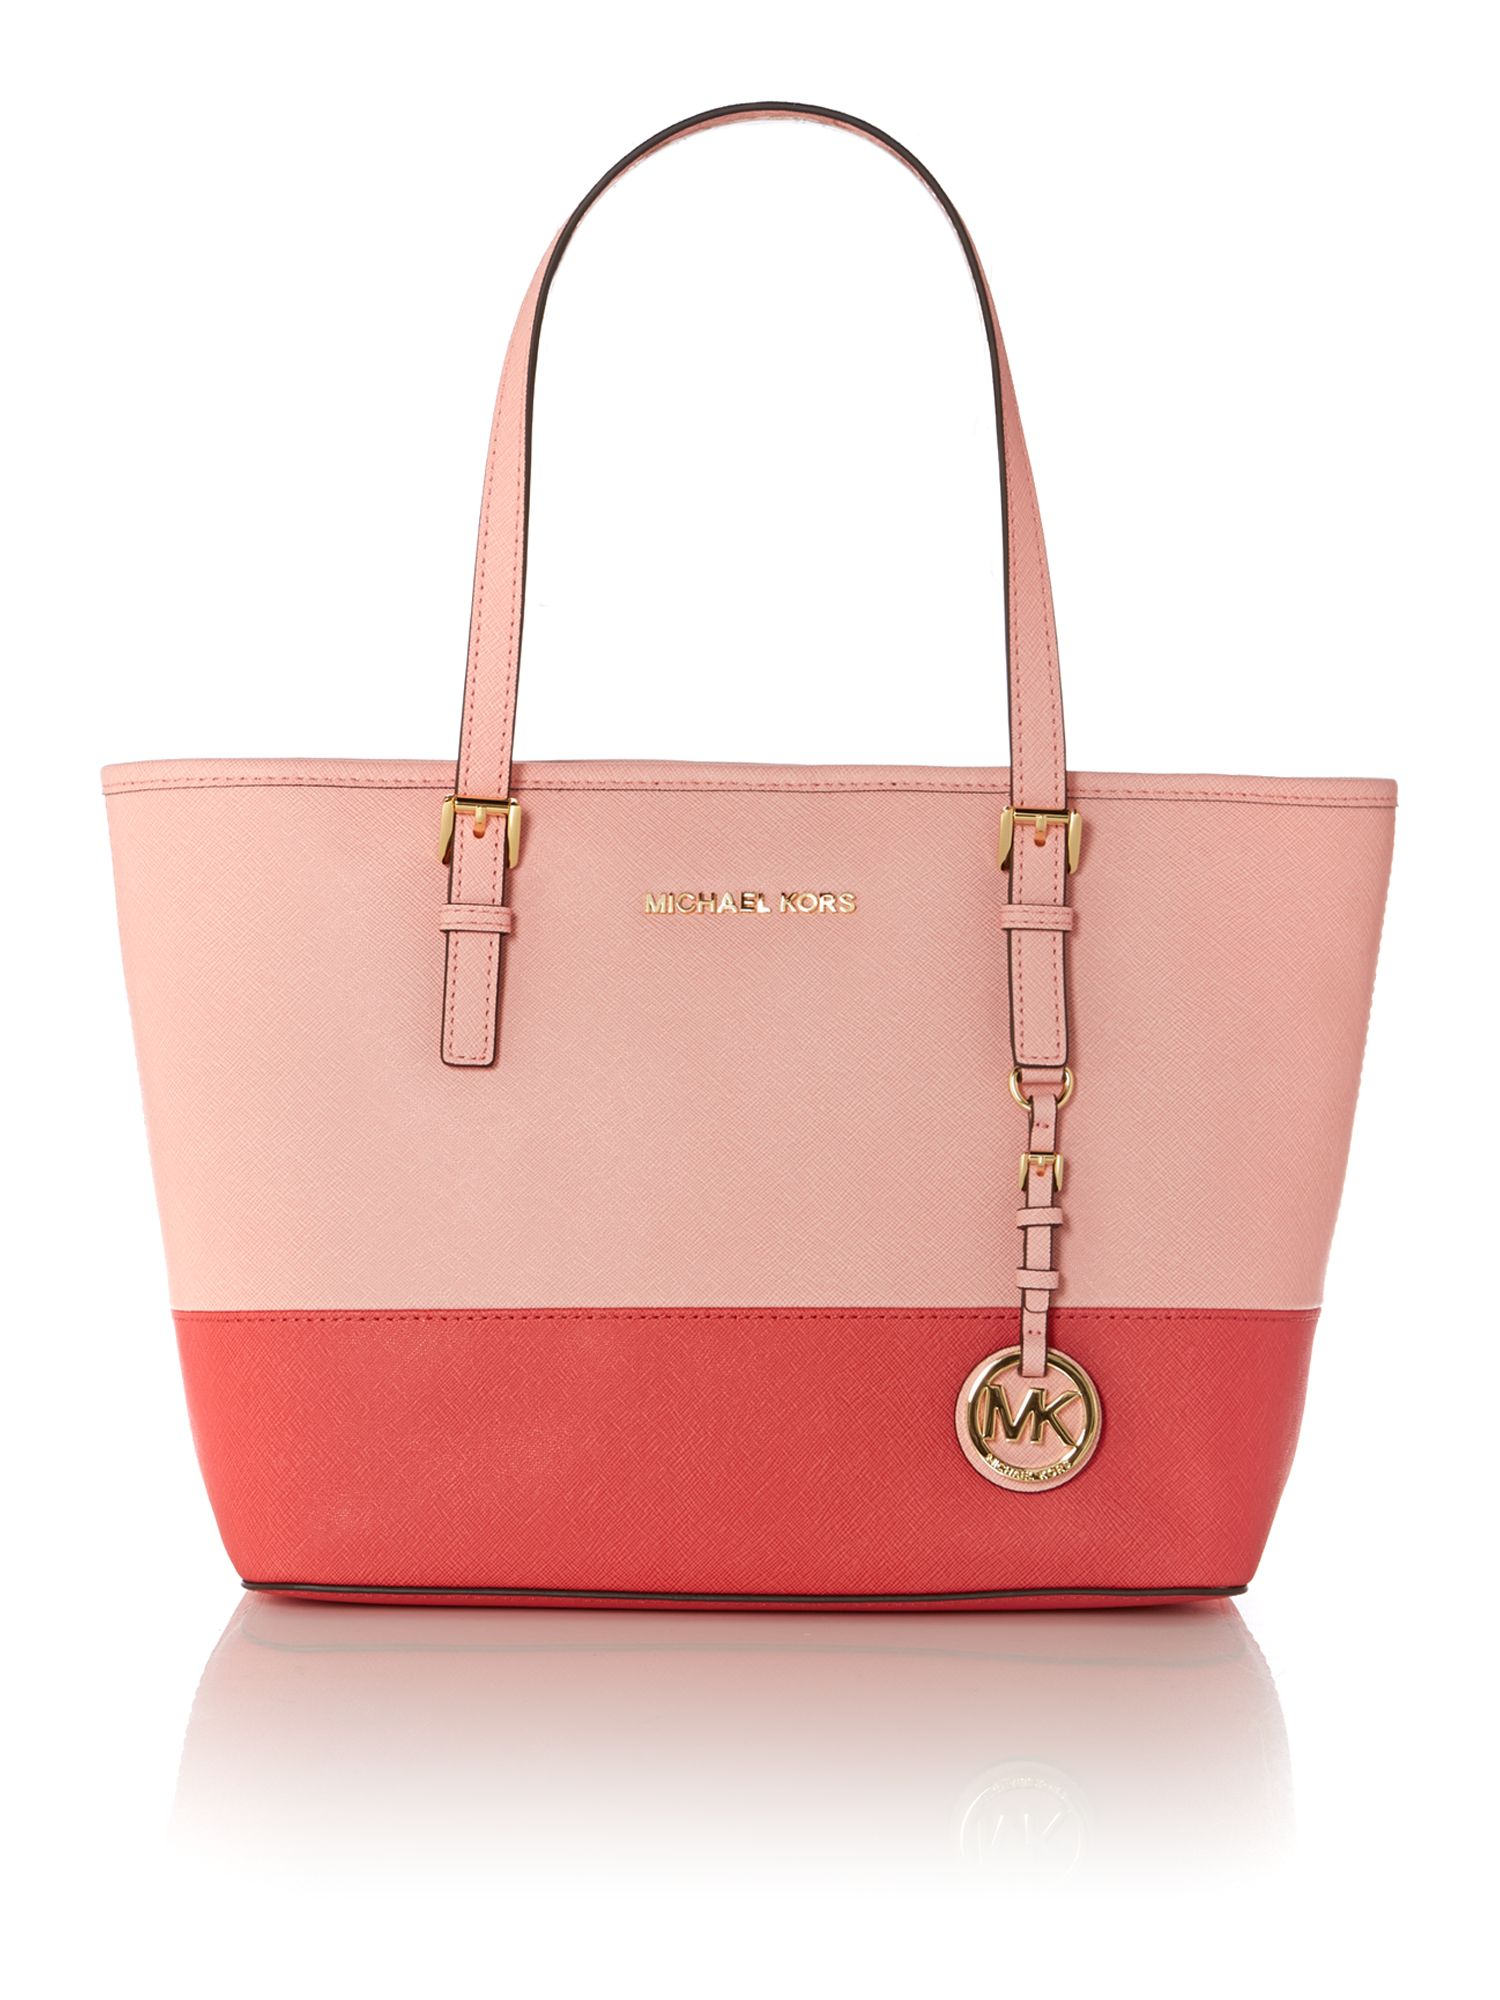 Michael kors Jetset Travel Pale Pink Small Tote Bag in Pink | Lyst